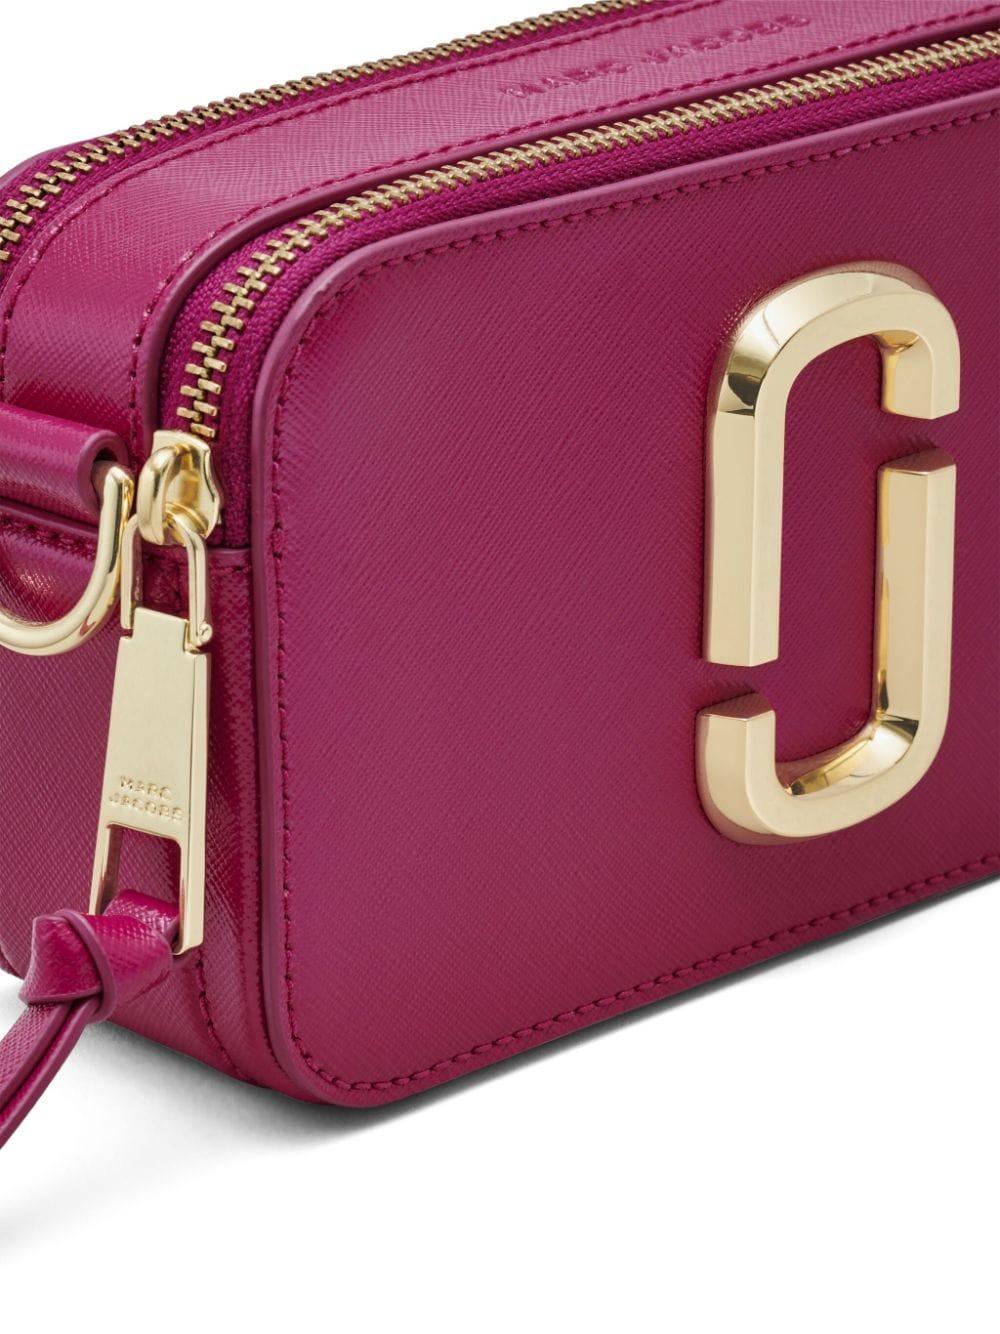 Marc Jacobs The Utility Snapshot Bag In Pink & Purple